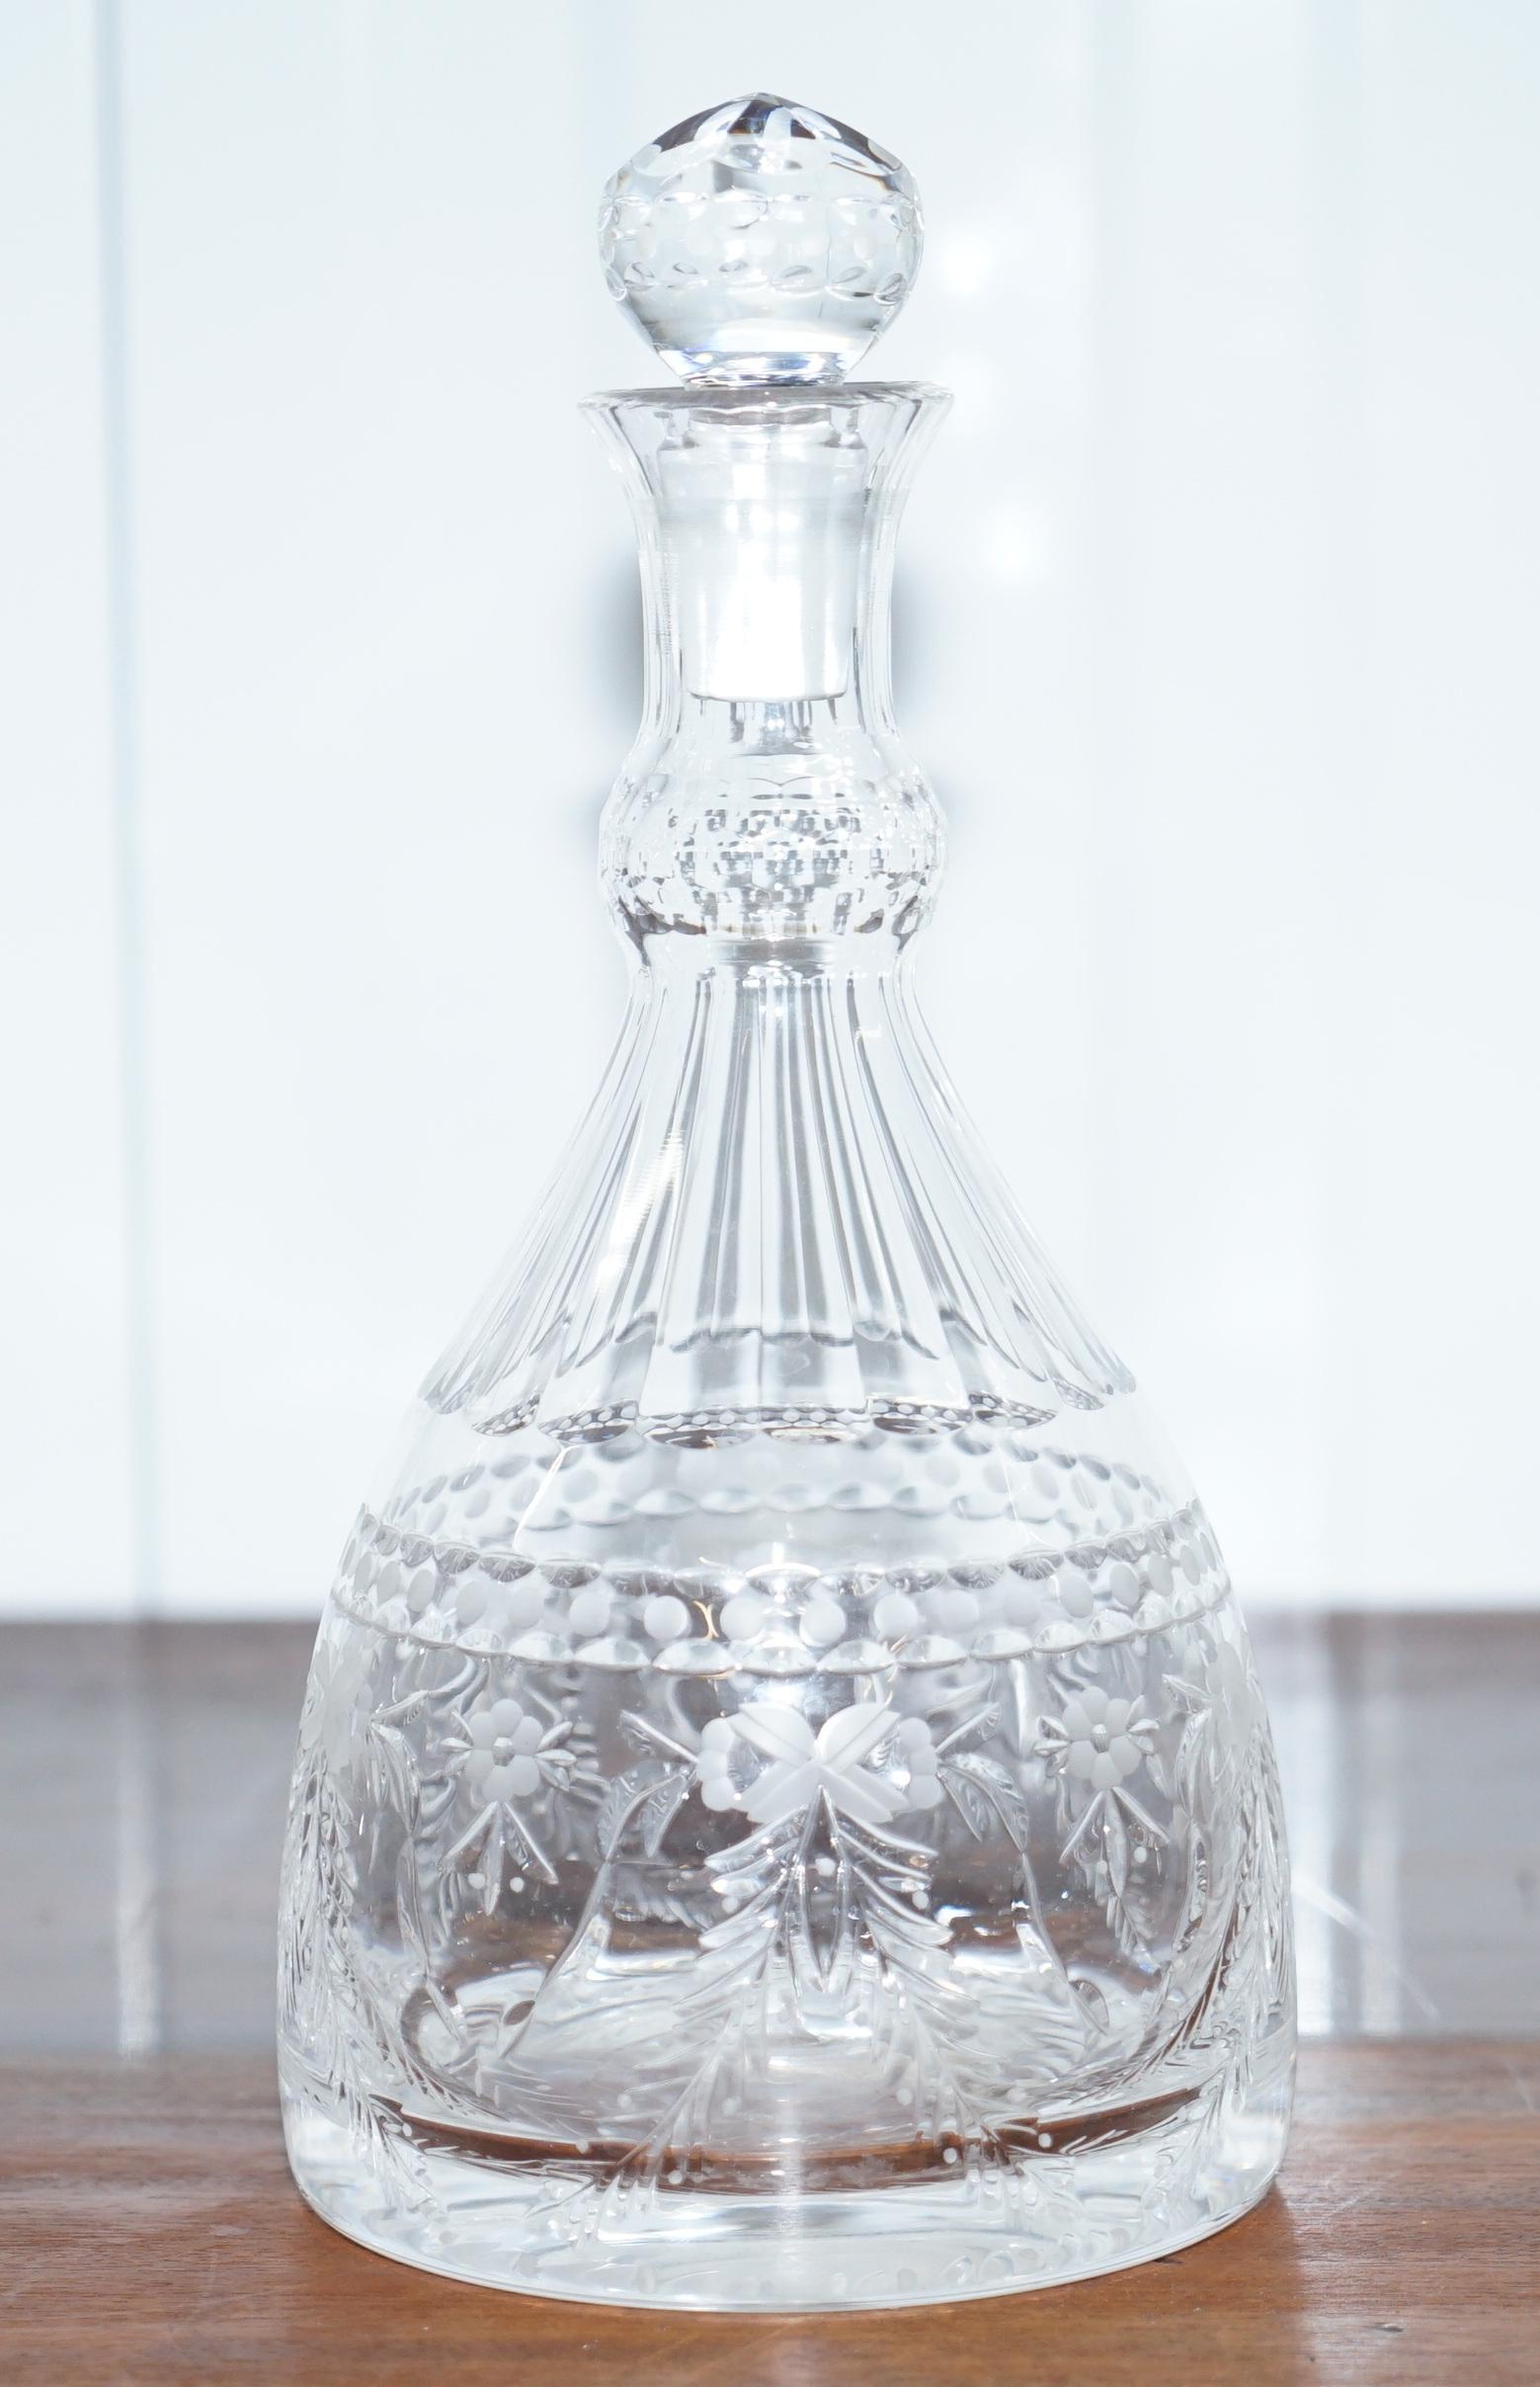 We are delighted to offer for sale this lovely pair of Thomas Goode 1827 cut glass crystal decanters

This pair are in retail perfect condition to my eyes, they have been made by one of the finest glass and crystal makers in the world, the